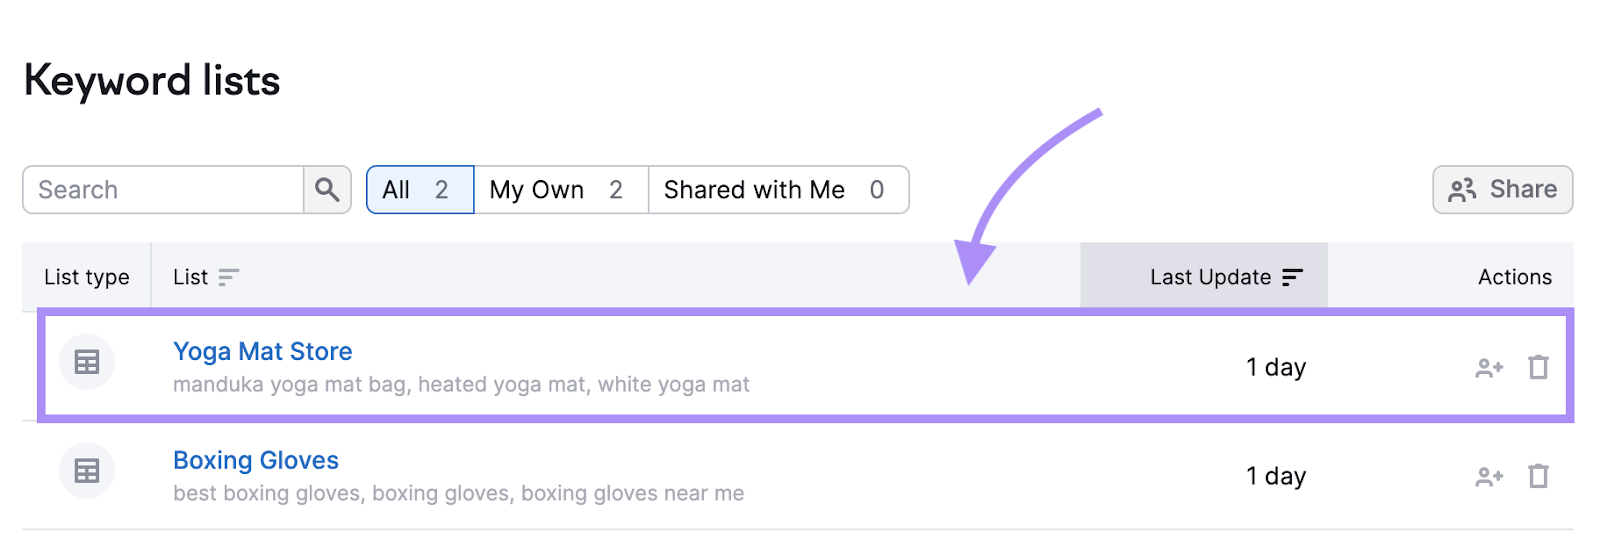 "Yoga Mat Store" selected under "Keyword lists" in Keyword Manager